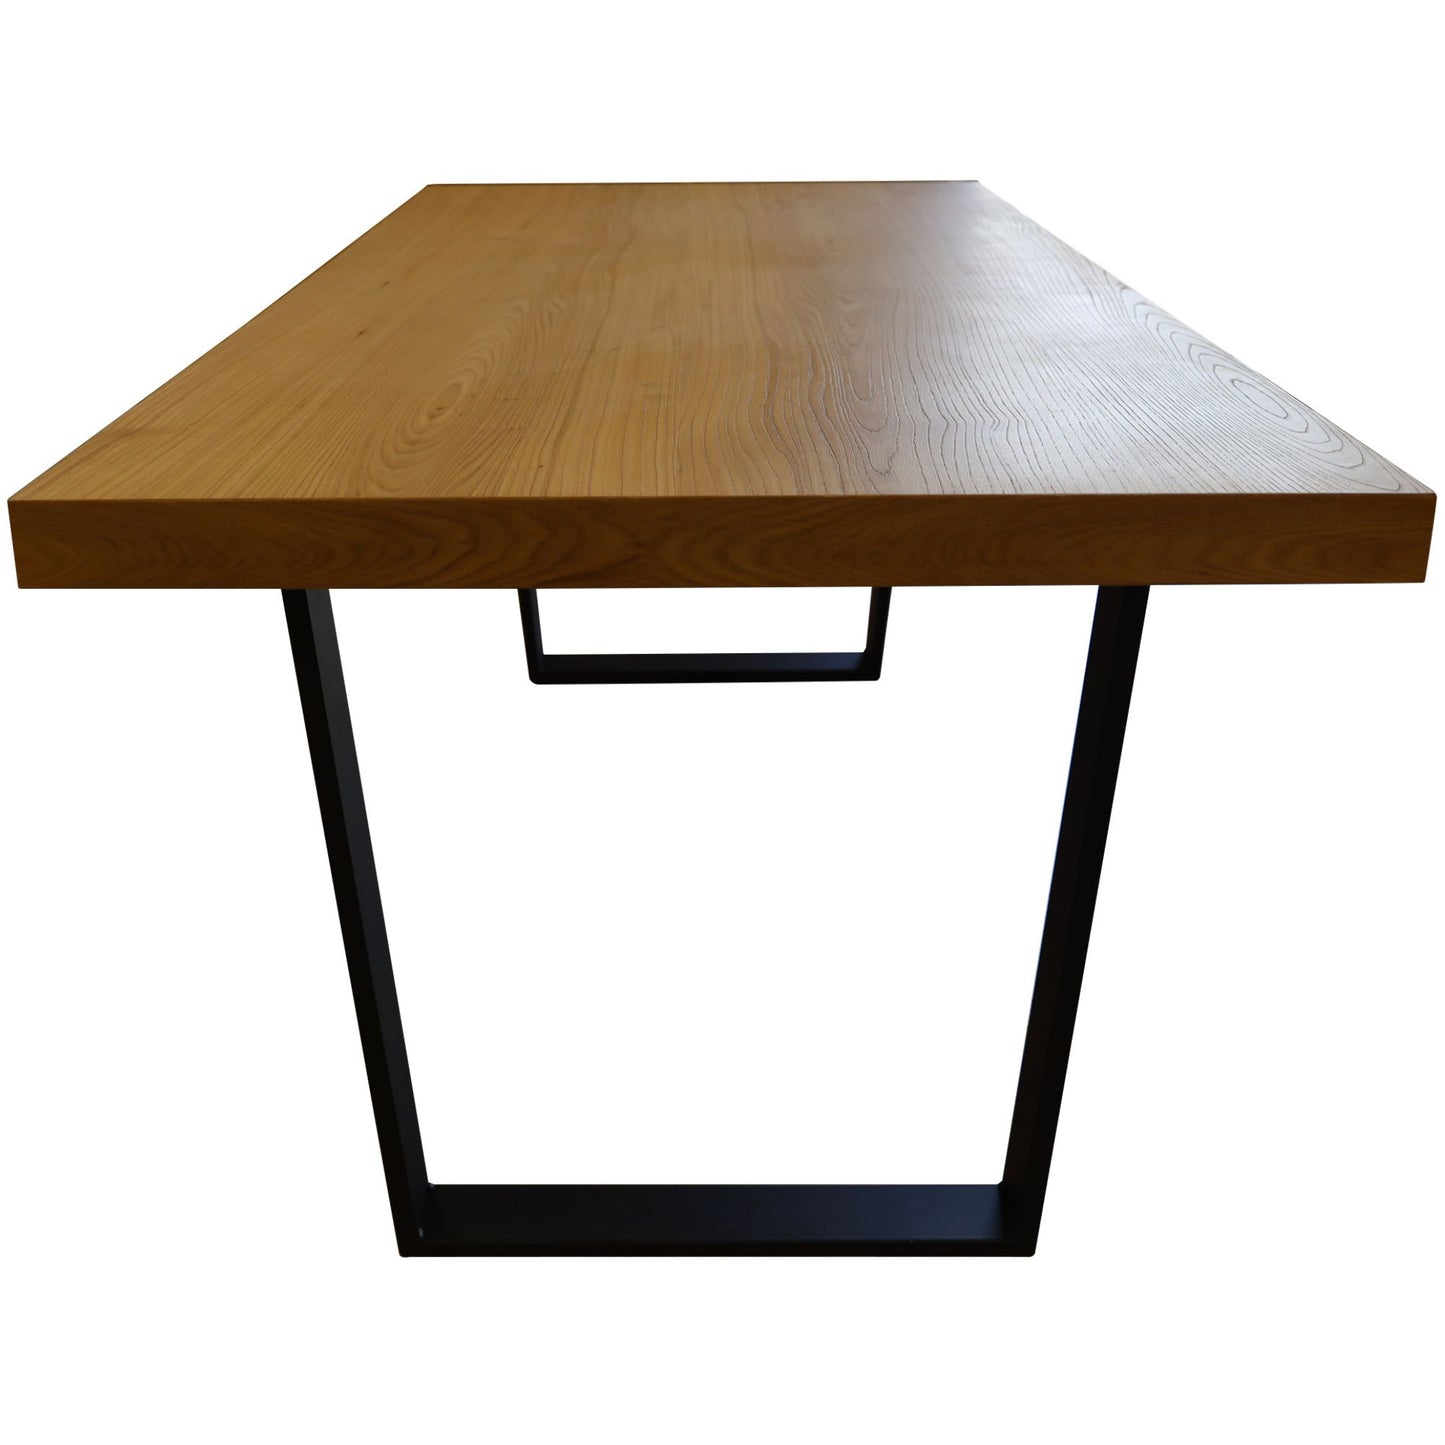 Elm Timber Wood Dining Table with Black Metal Leg 180cm- Natural